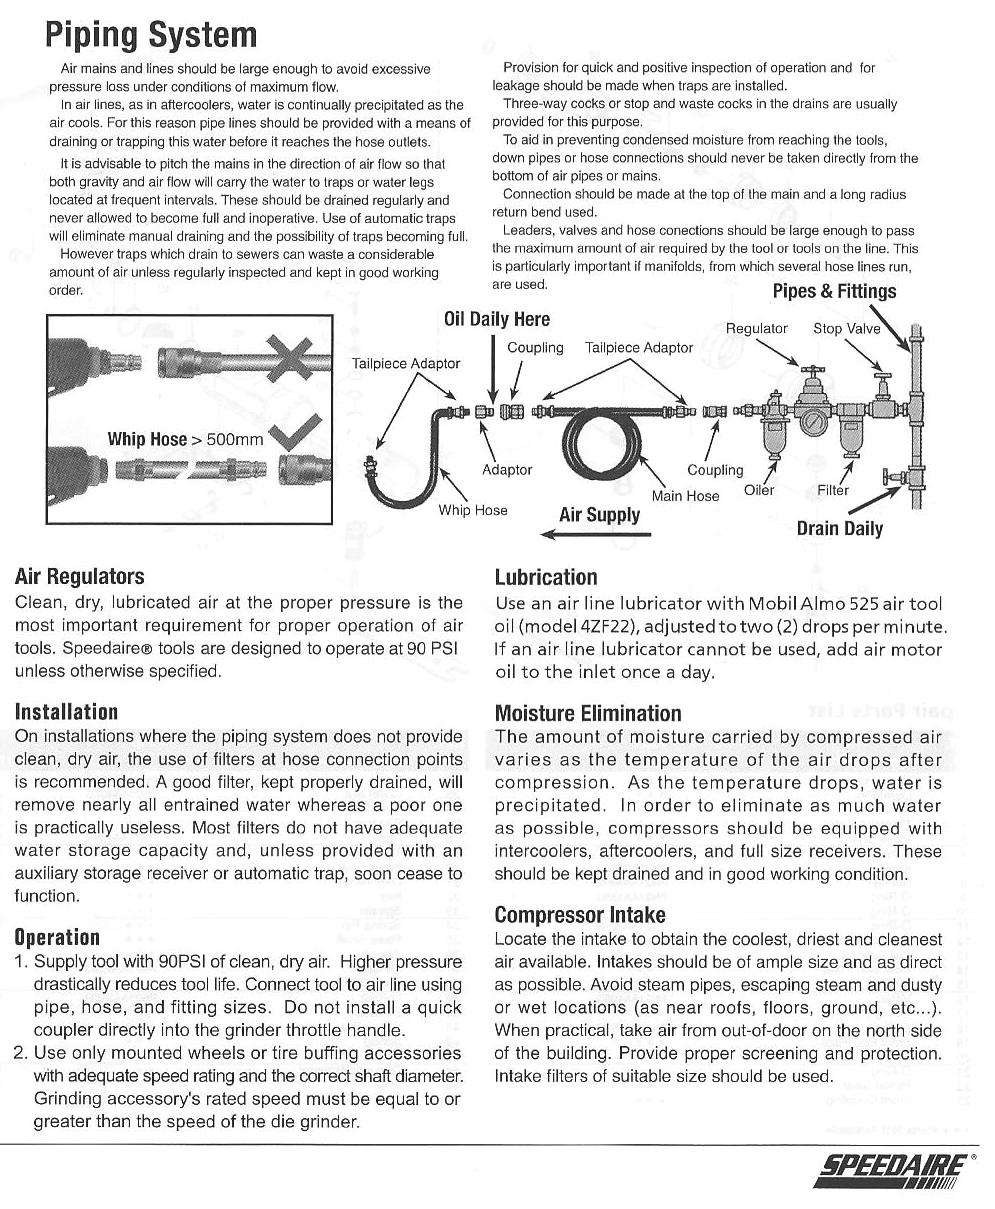 Speedaire Operating Instructions and